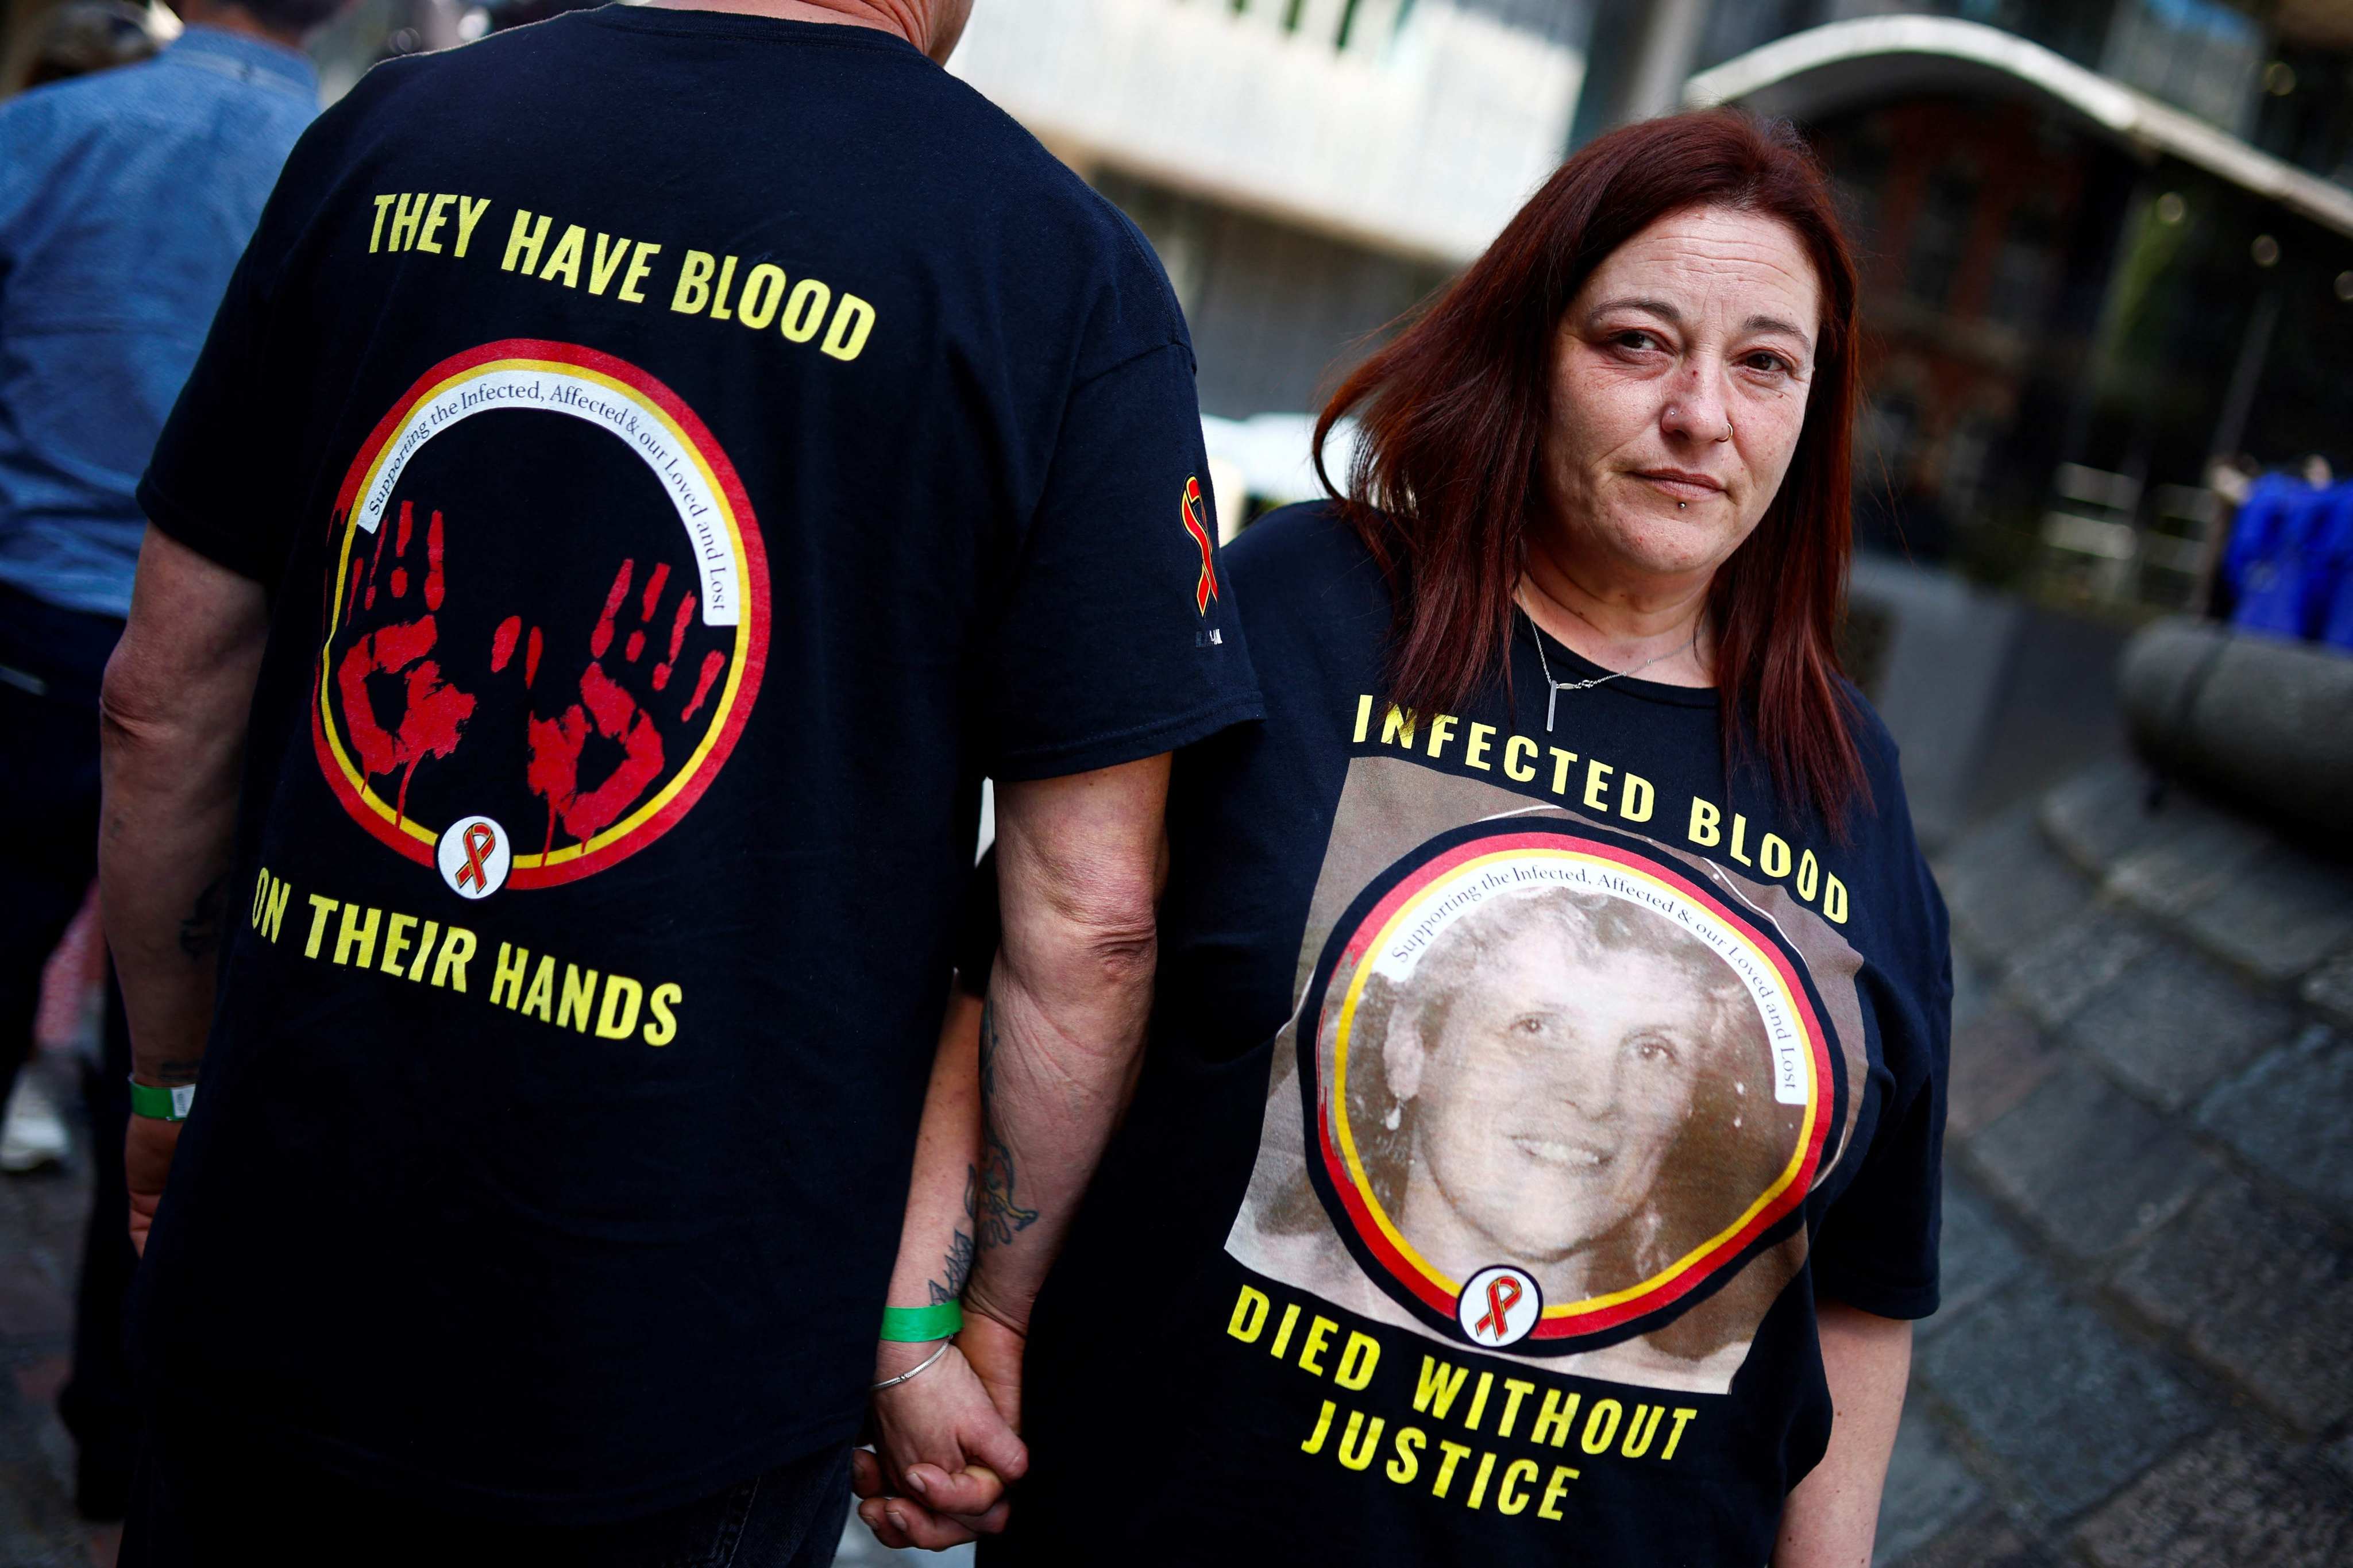 A relative of a victim wears a t-shirt reading “Infected blood, died without justice” as she stands outside Westminster, in central London, on May 20 during the release of the Infected Blood Inquiry final report. Photo: AFP